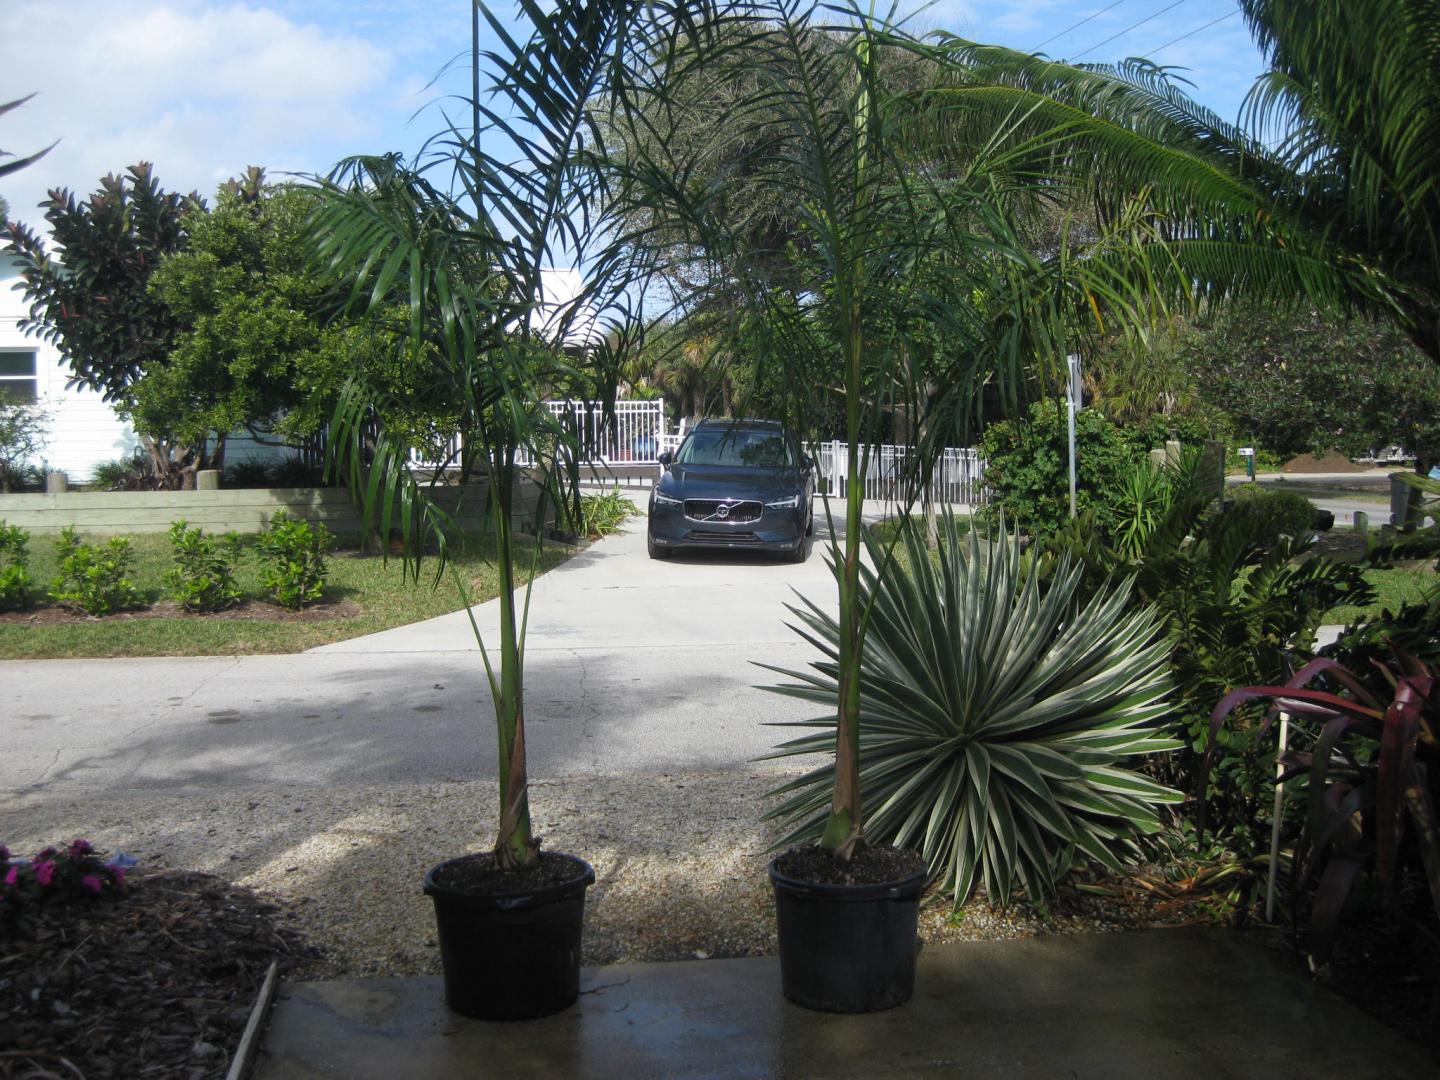 Royal palm spacing - how close is too close? - DISCUSSING PALM TREES  WORLDWIDE - PalmTalk